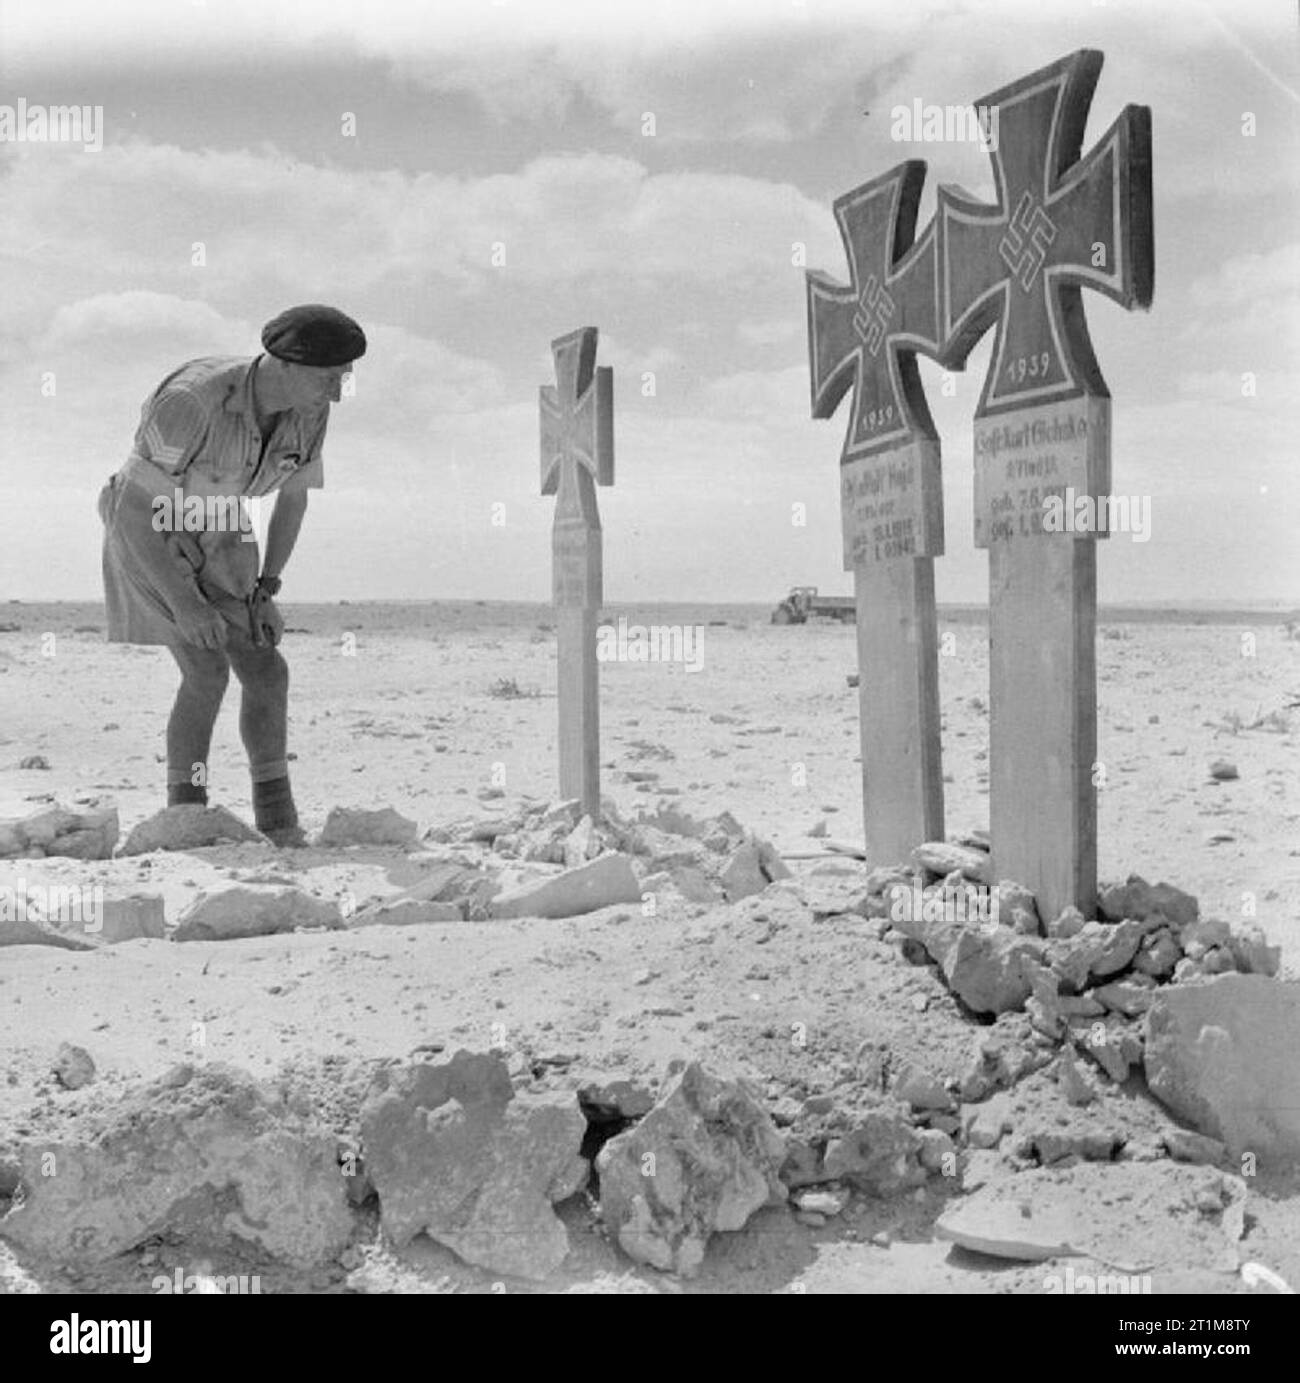 The British Army in North Africa 1942 A Royal Tank Regiment soldier examines the graves of German soldiers killed in recent fighting, 9 September 1942. Stock Photo